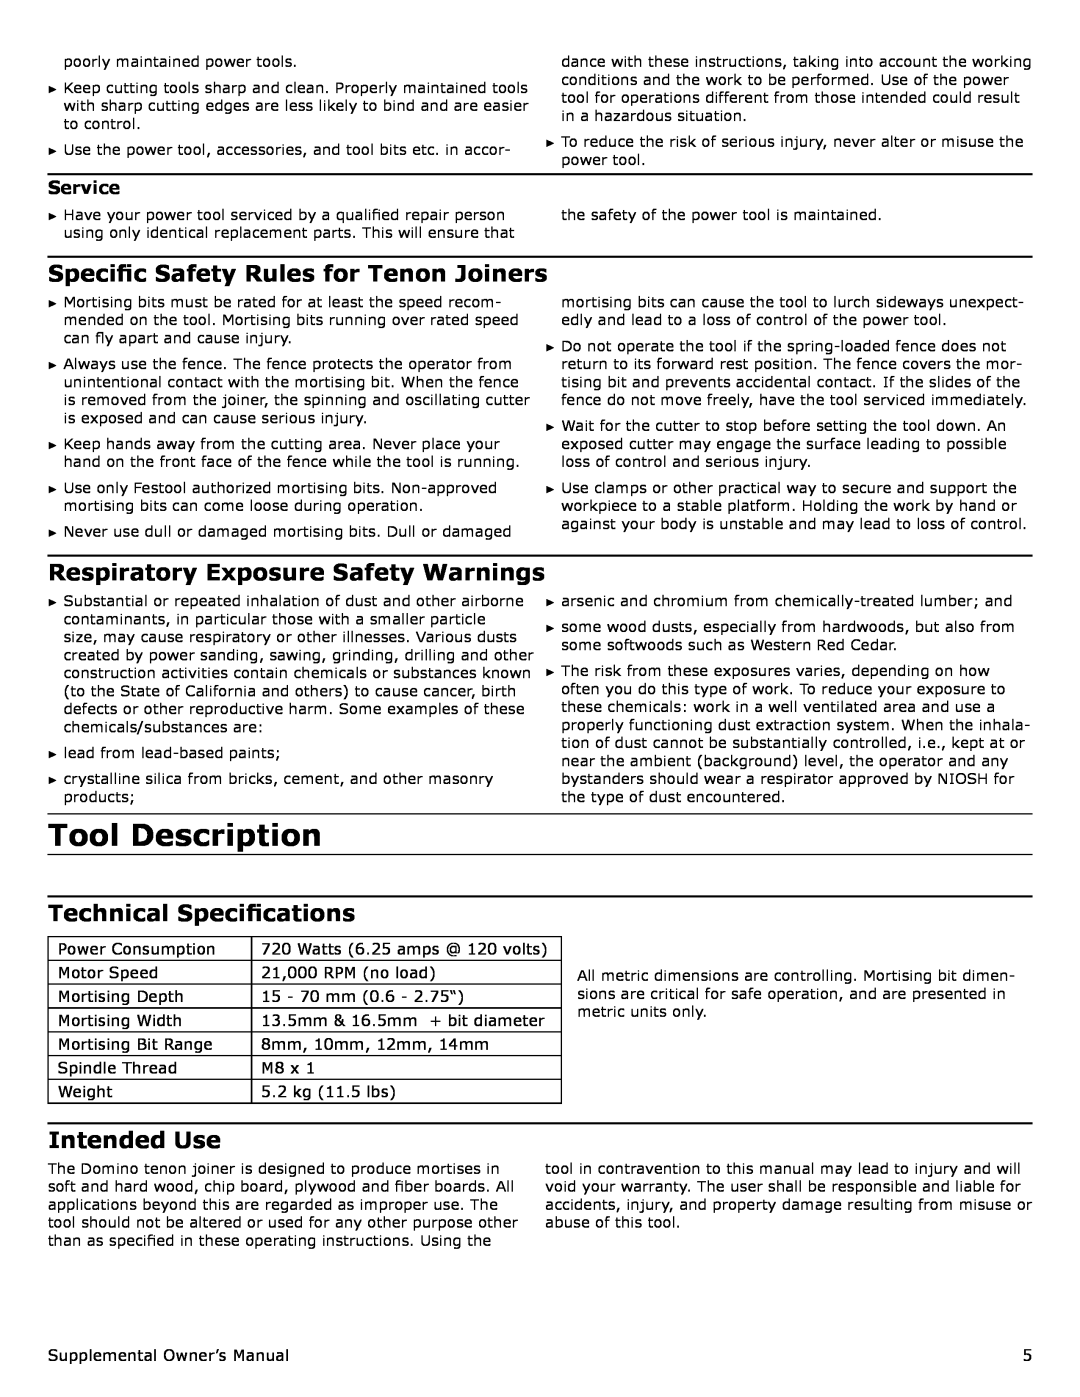 Festool PI574447 Tool Description, Specific Safety Rules for Tenon Joiners, Respiratory Exposure Safety Warnings, Service 